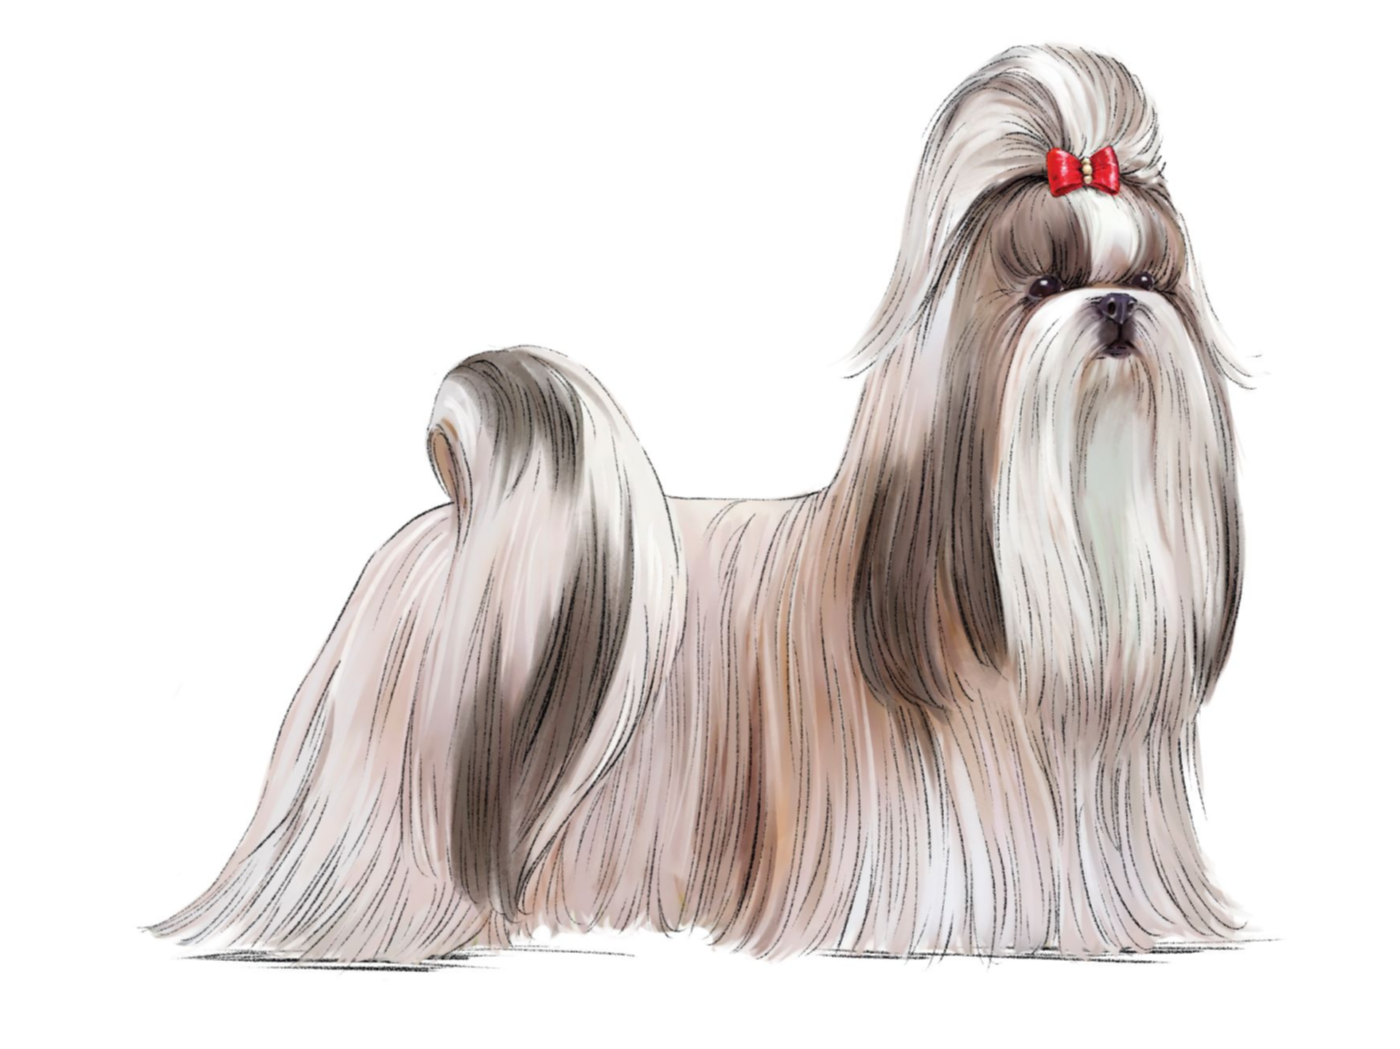 Illustration of Shih Tzu with red bow clip